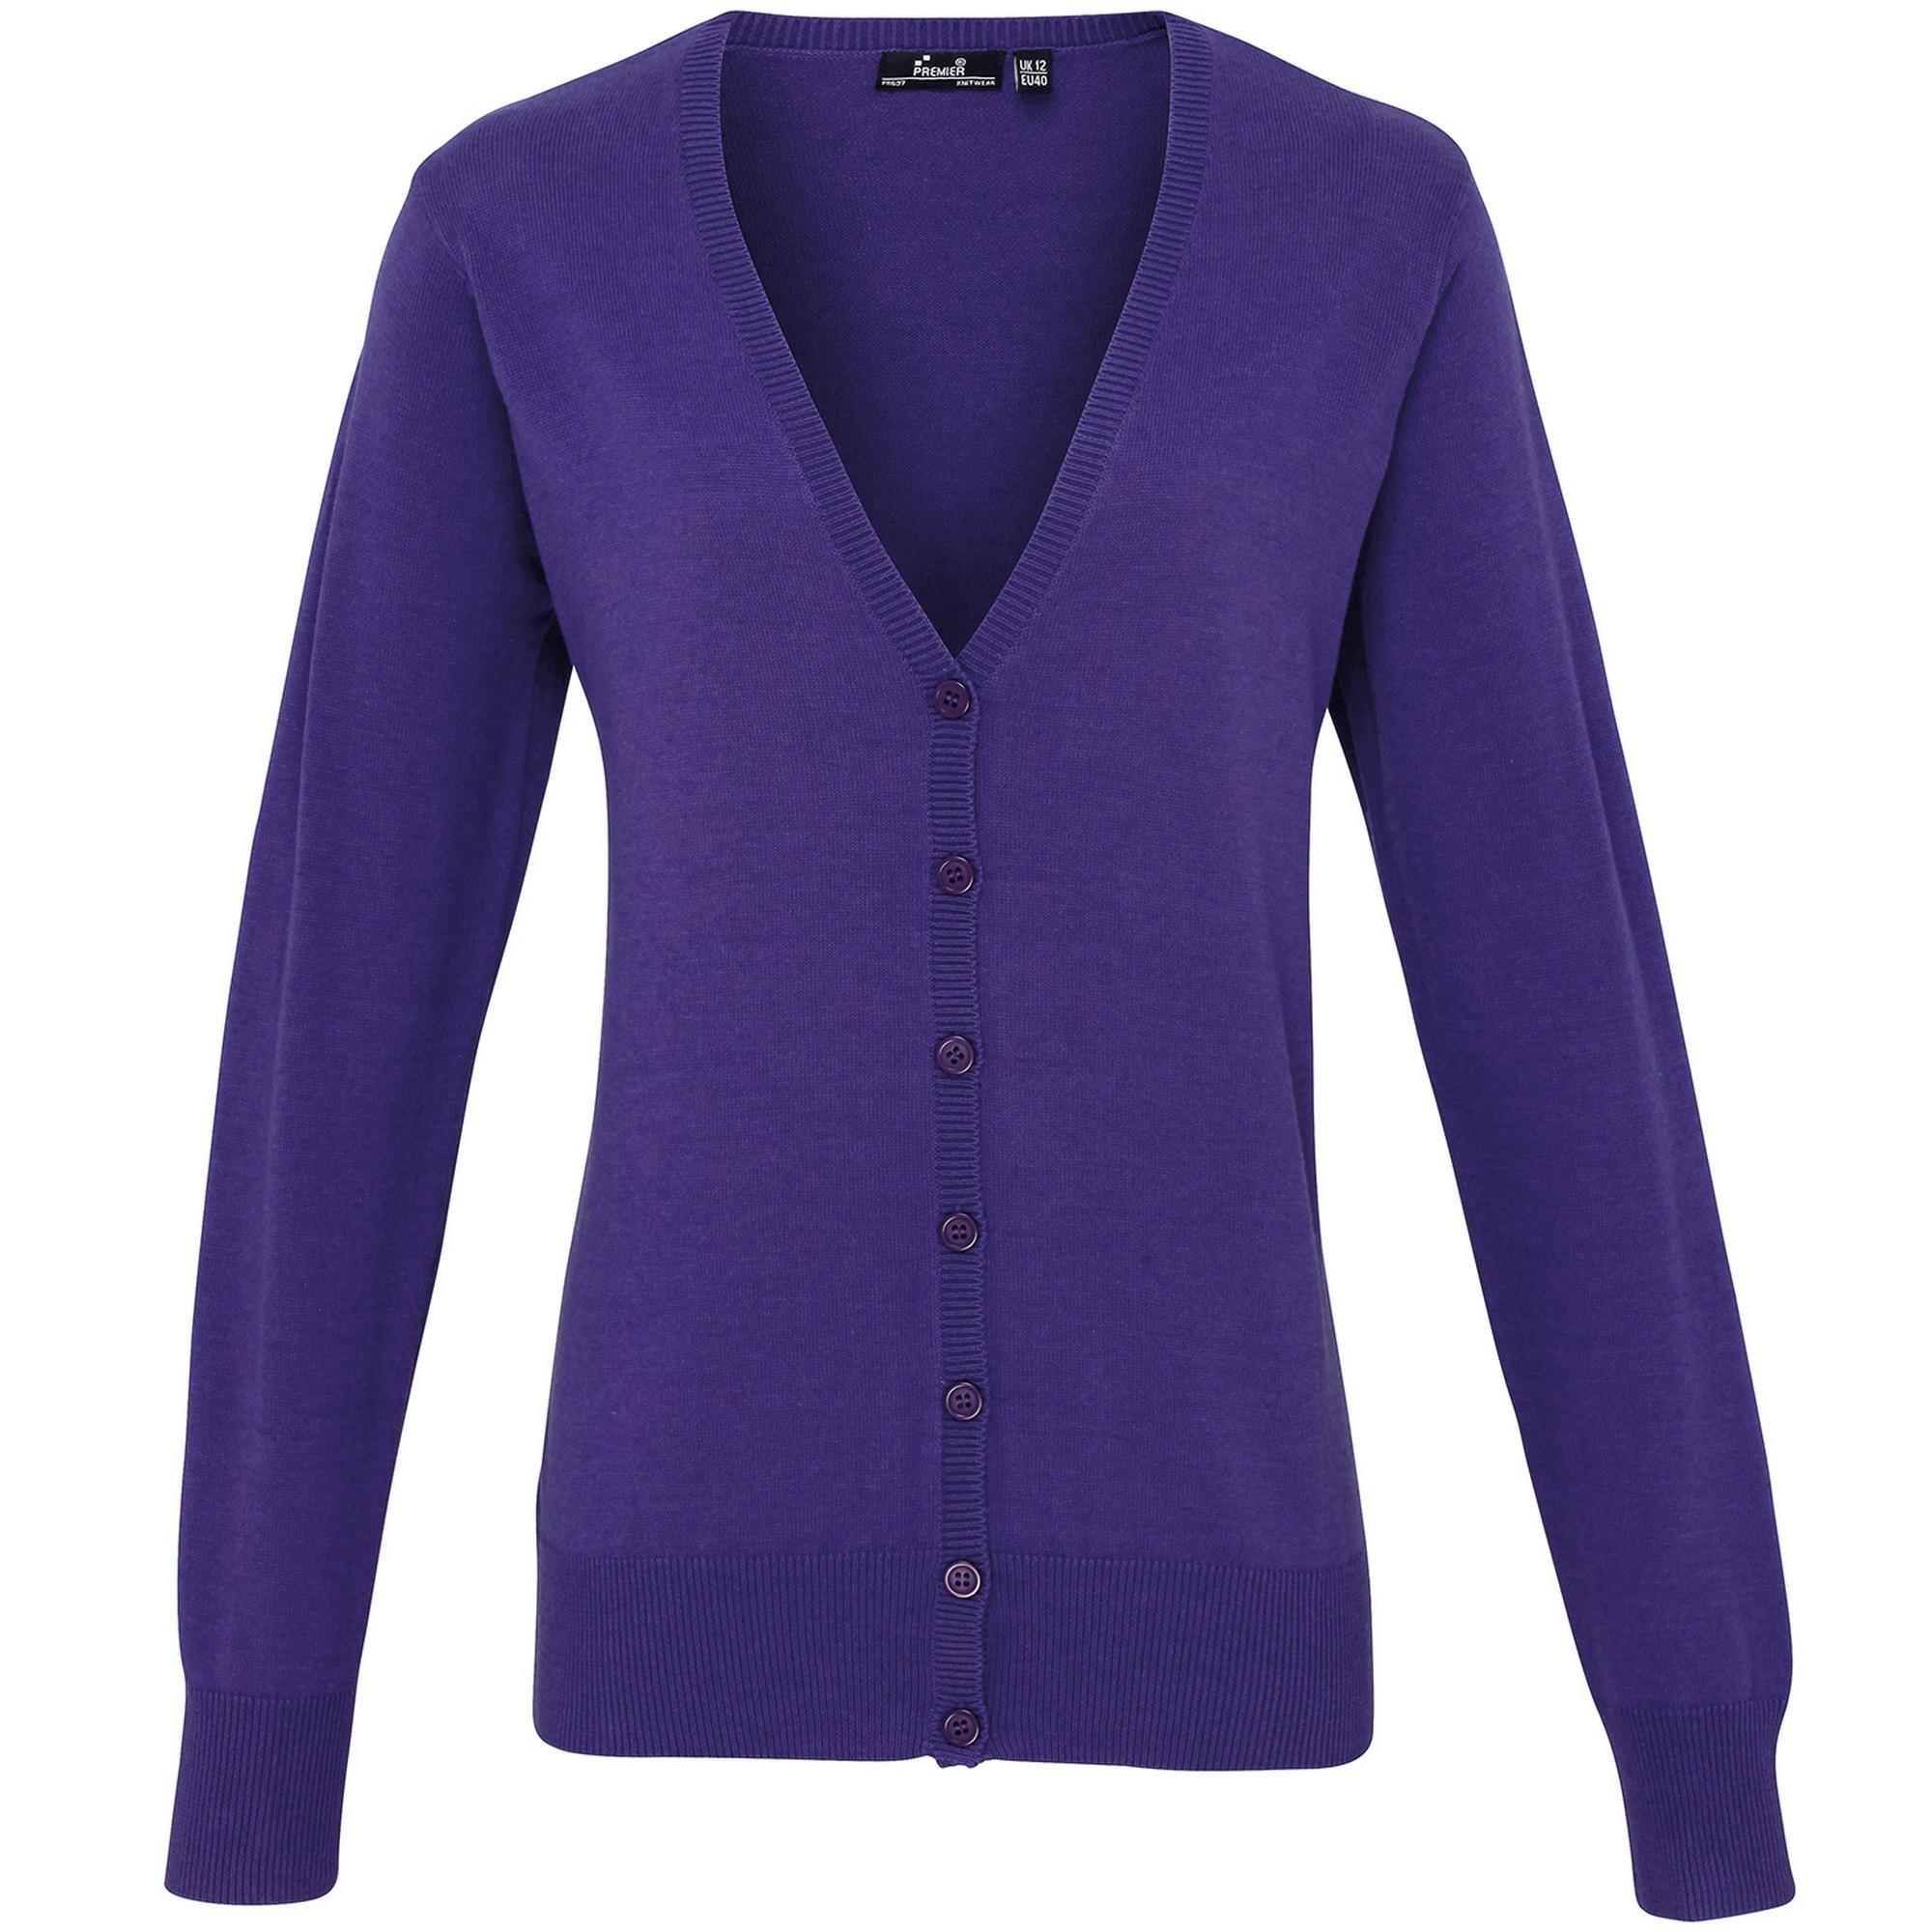 Premier Womens/Ladies Button Through Long Sleeve V-neck Knitted Cardigan (Purple) (14)